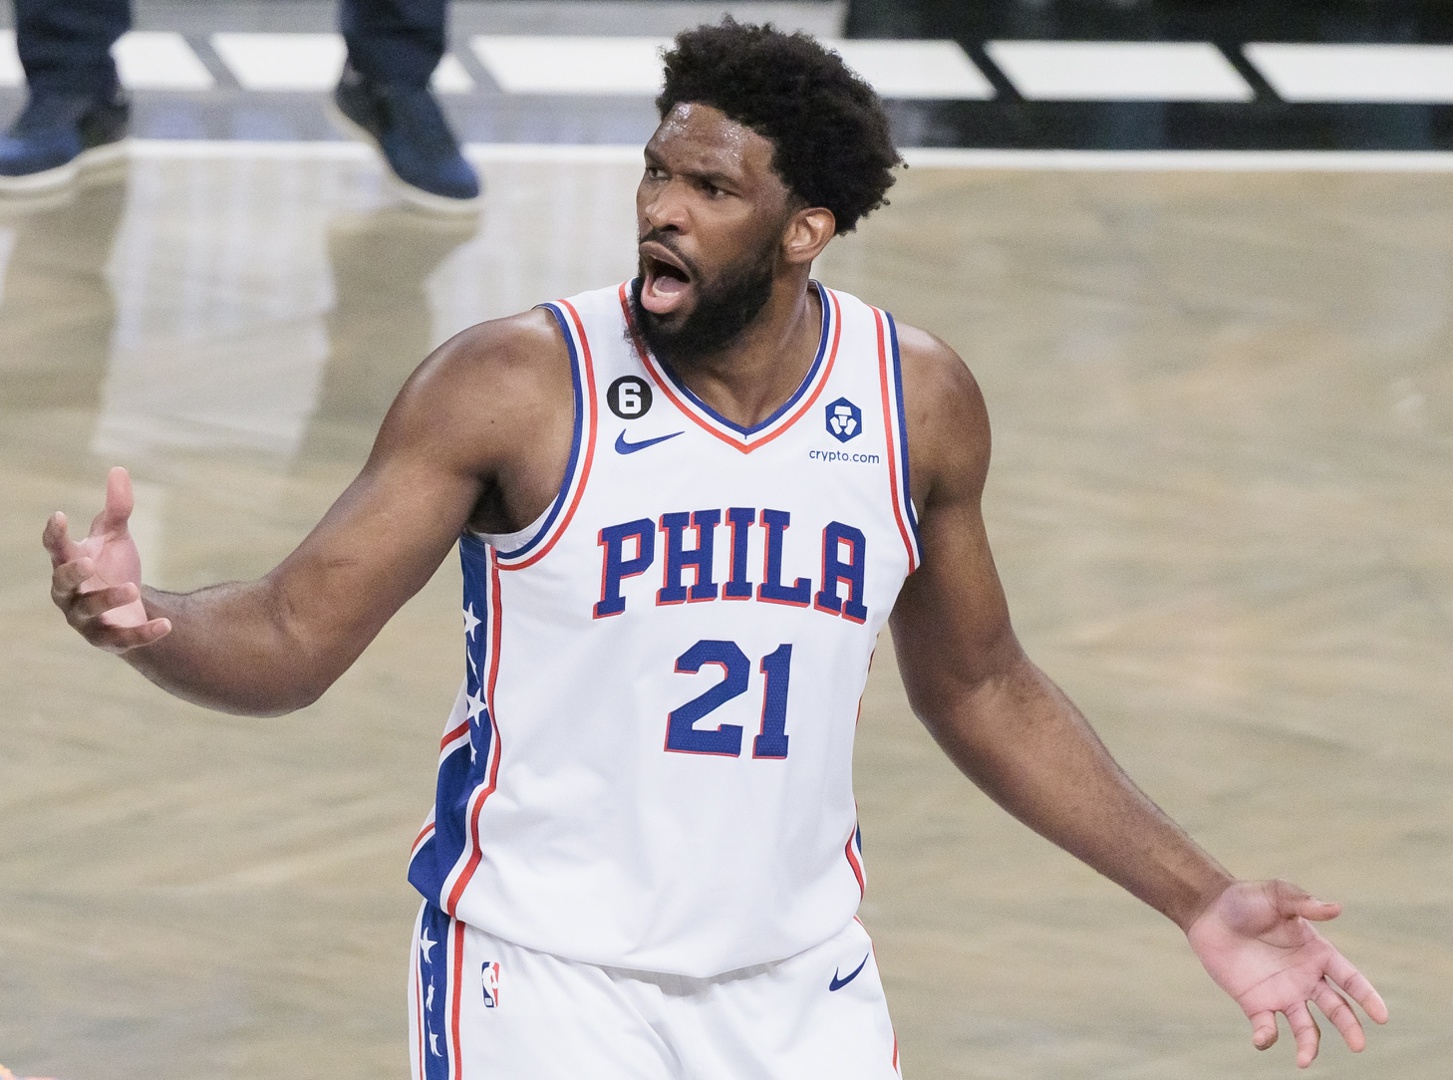 138-94. embiid destroza a los lakers